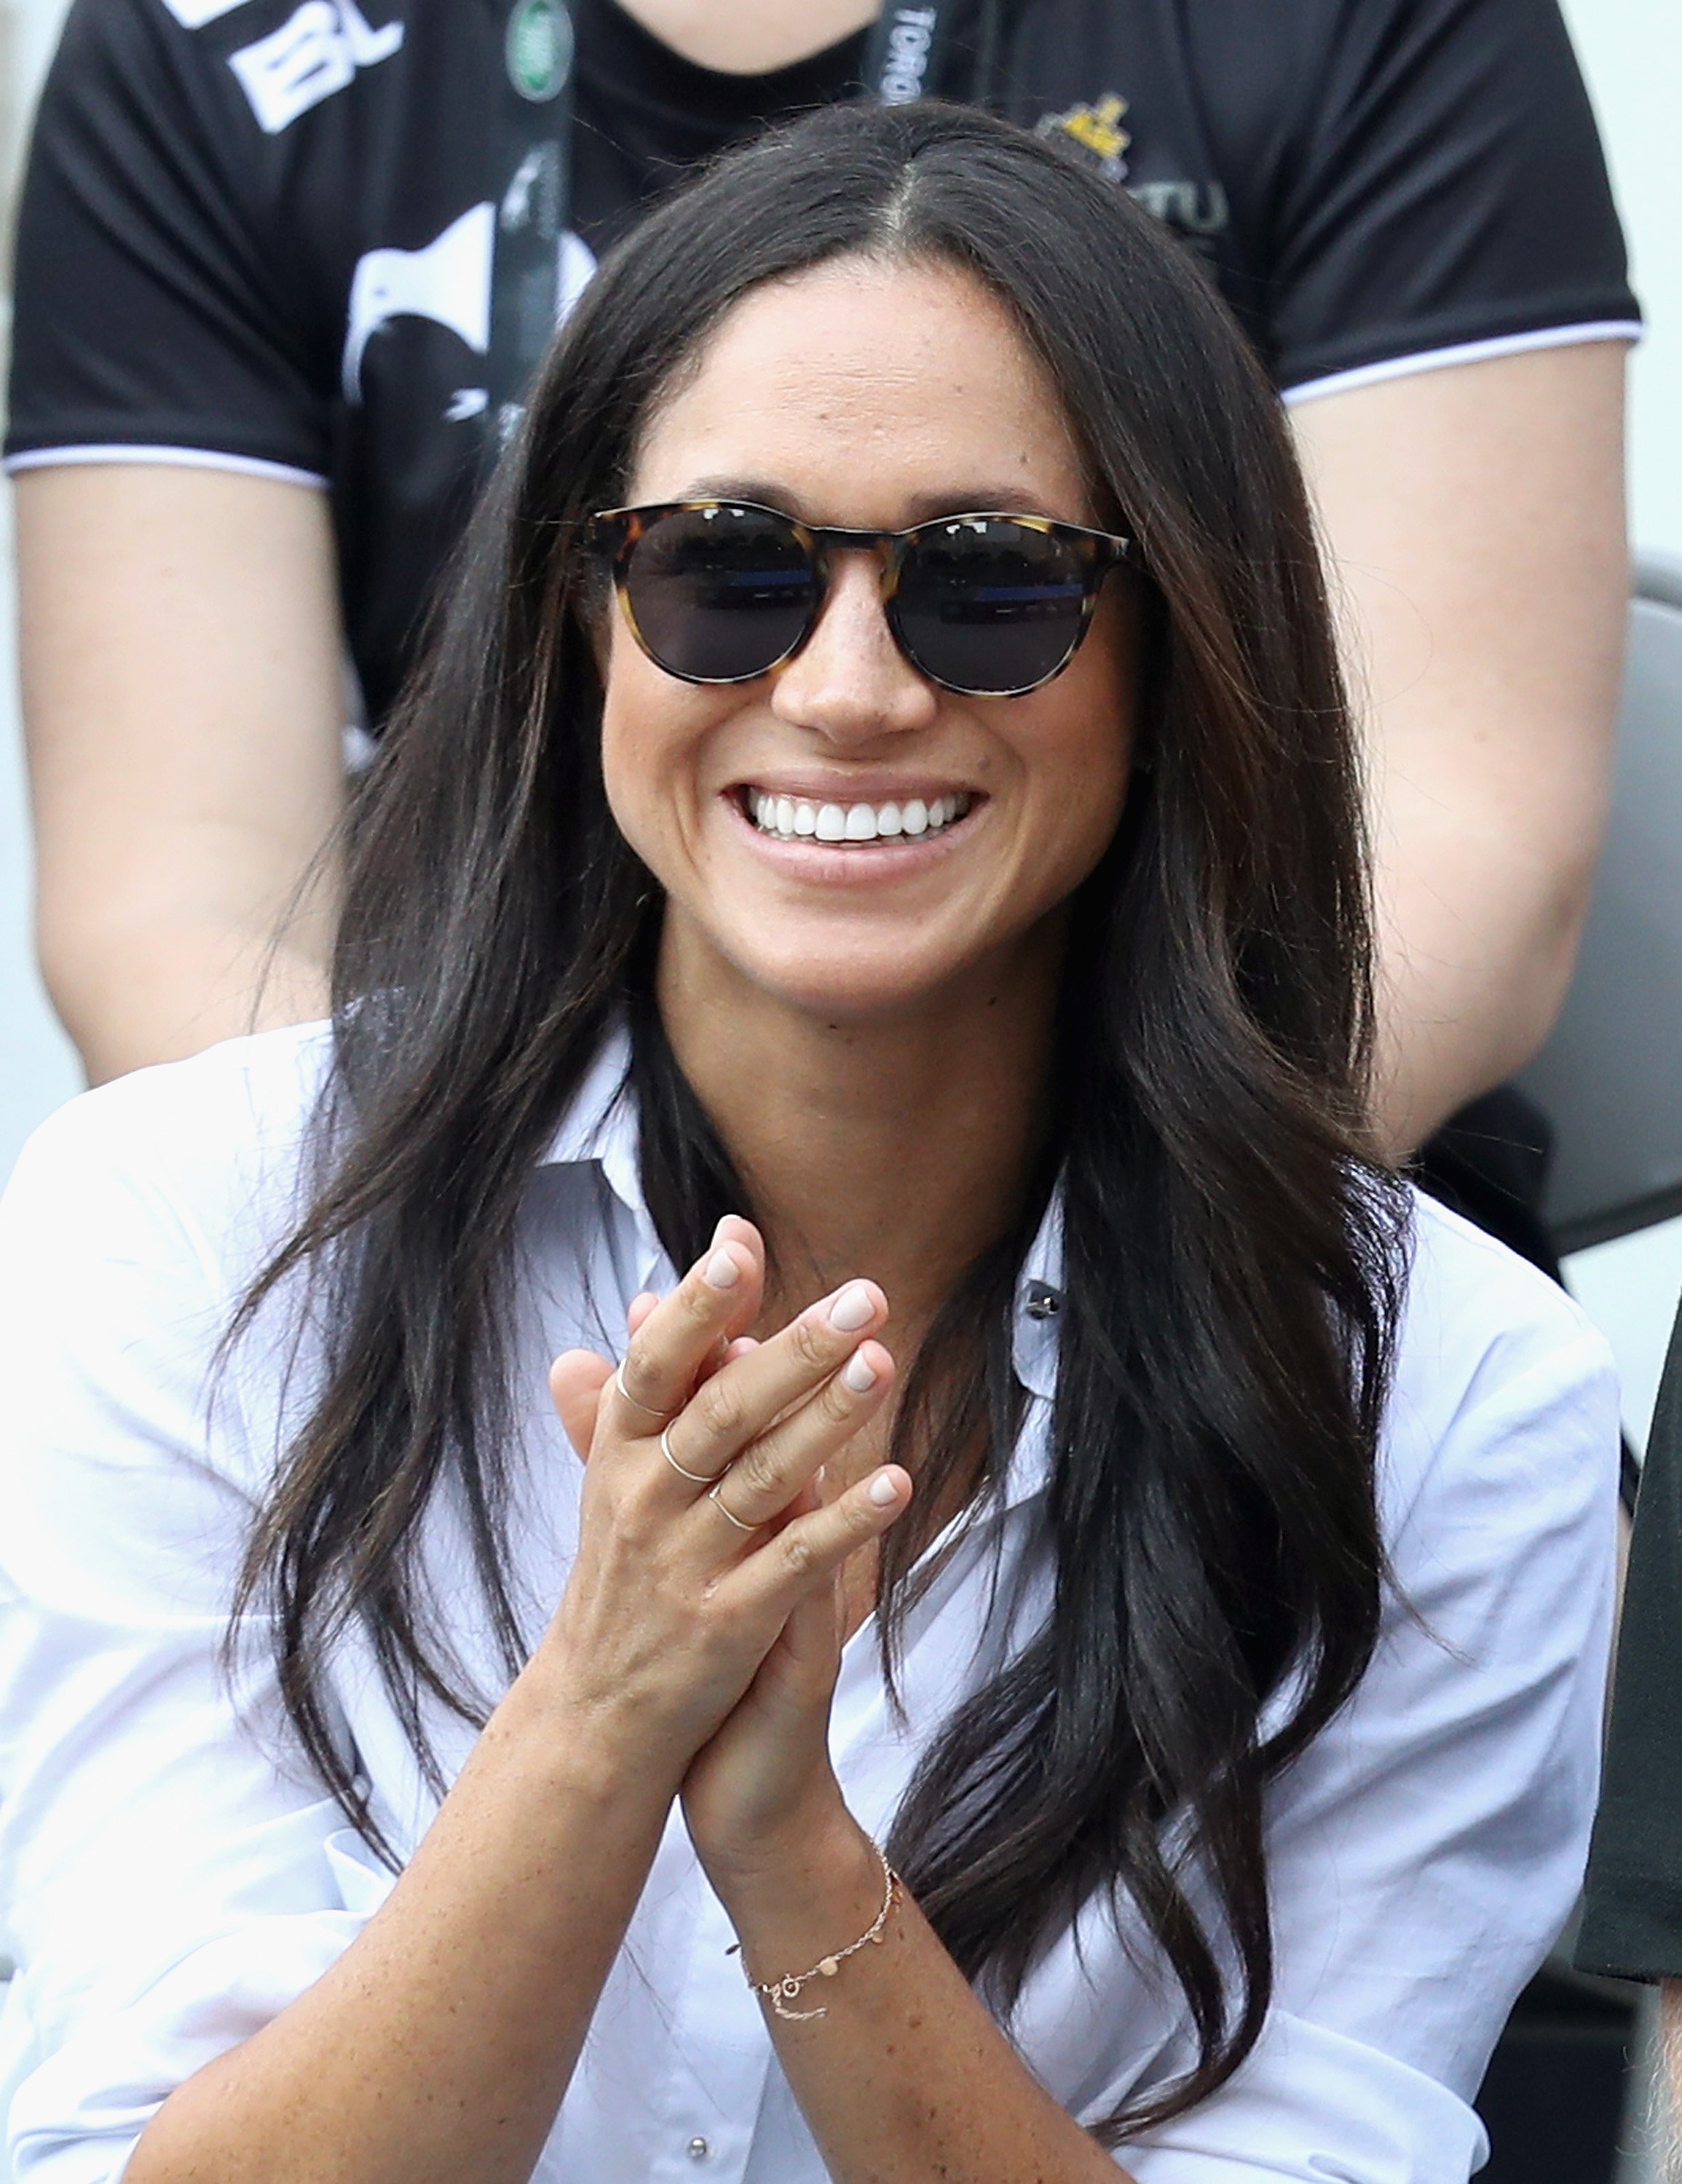 Meghan Markle pictured at a Wheelchair Tennis match during the Invictus Games 2017, Toronto, Canada. | Photo: Getty Images